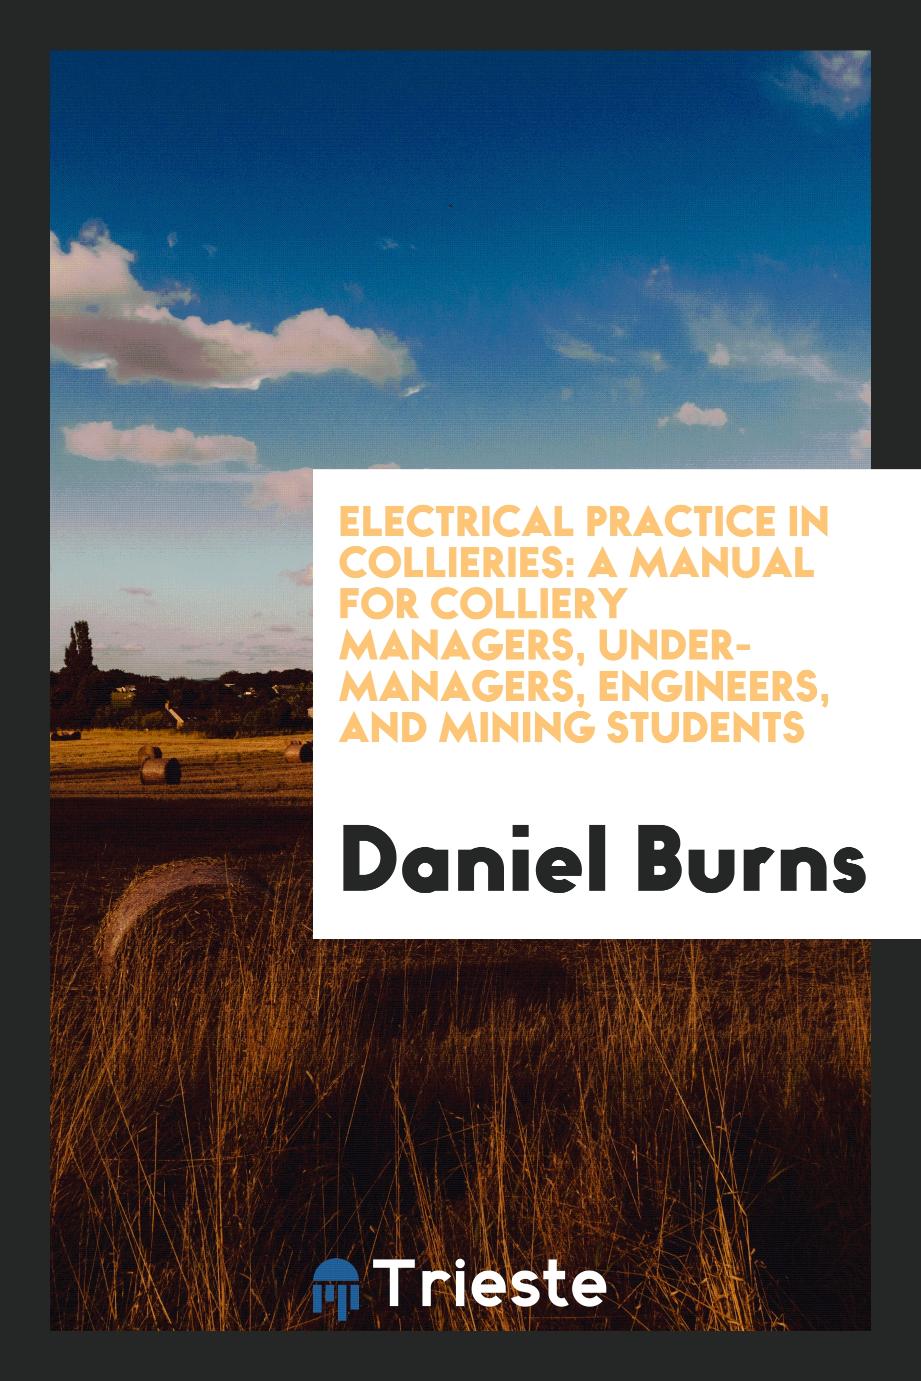 Electrical Practice in Collieries: A Manual for Colliery Managers, Under-Managers, Engineers, and Mining Students